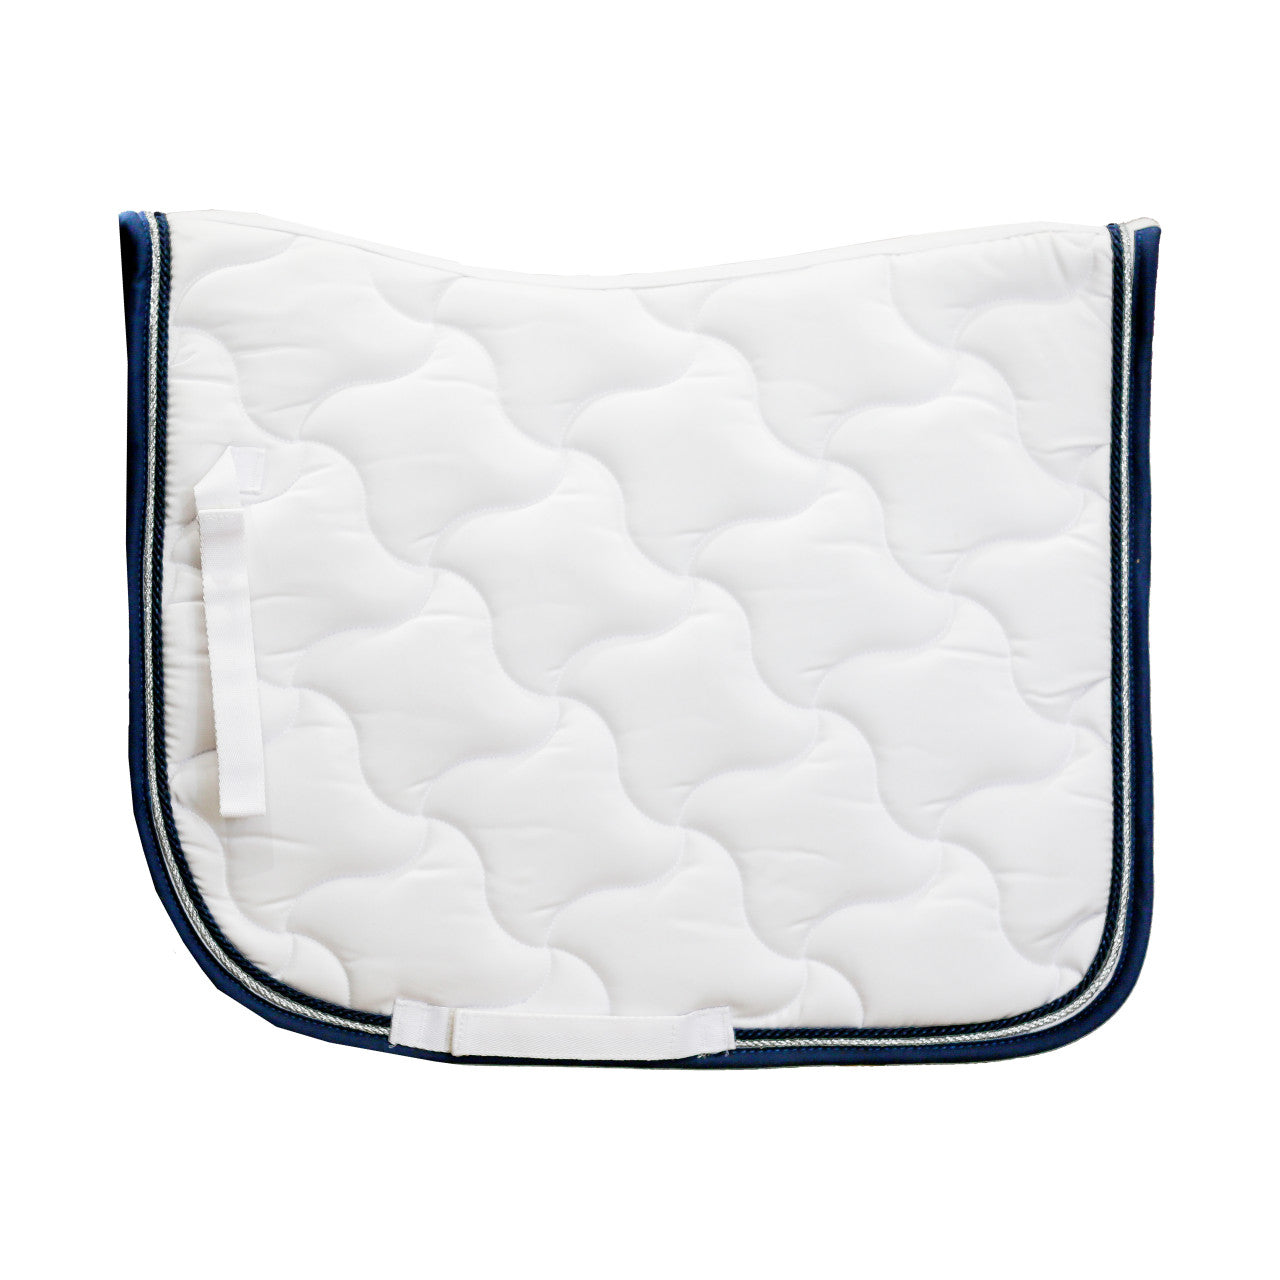 Competition White Dressage Saddle Pad - Navy Binding  LOW STOCK....LAST FEW LEFT!!